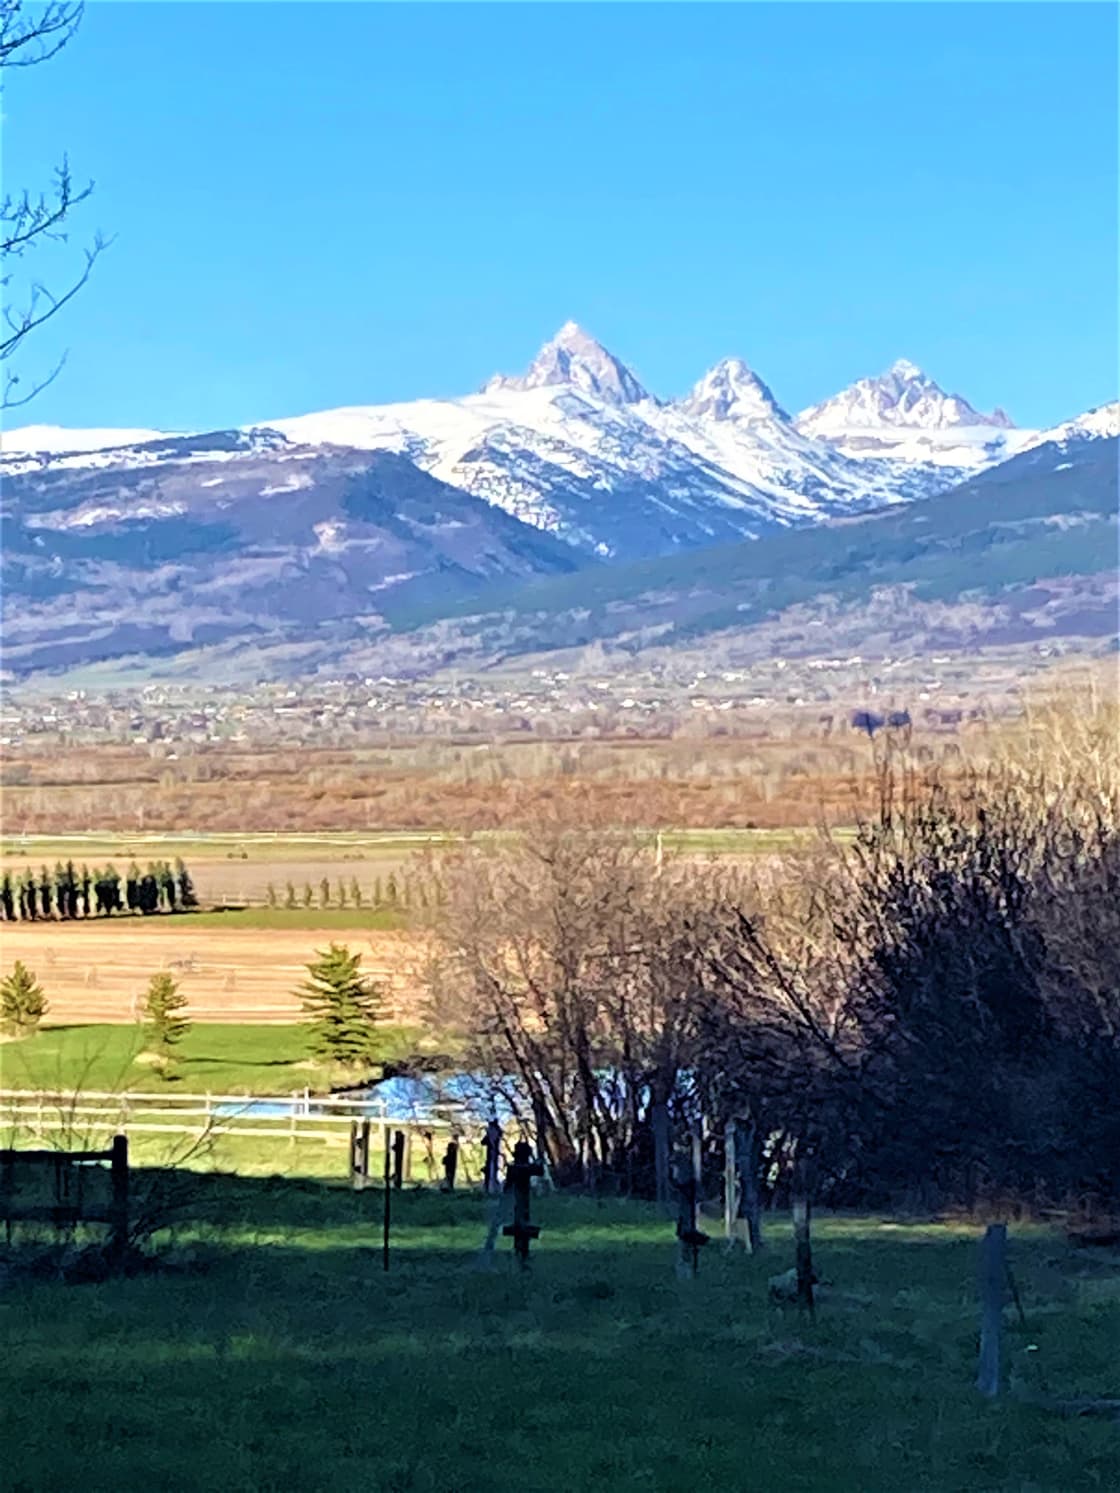 Go for a walk in the neighborhood and enjoy these world class views of the Teton range.